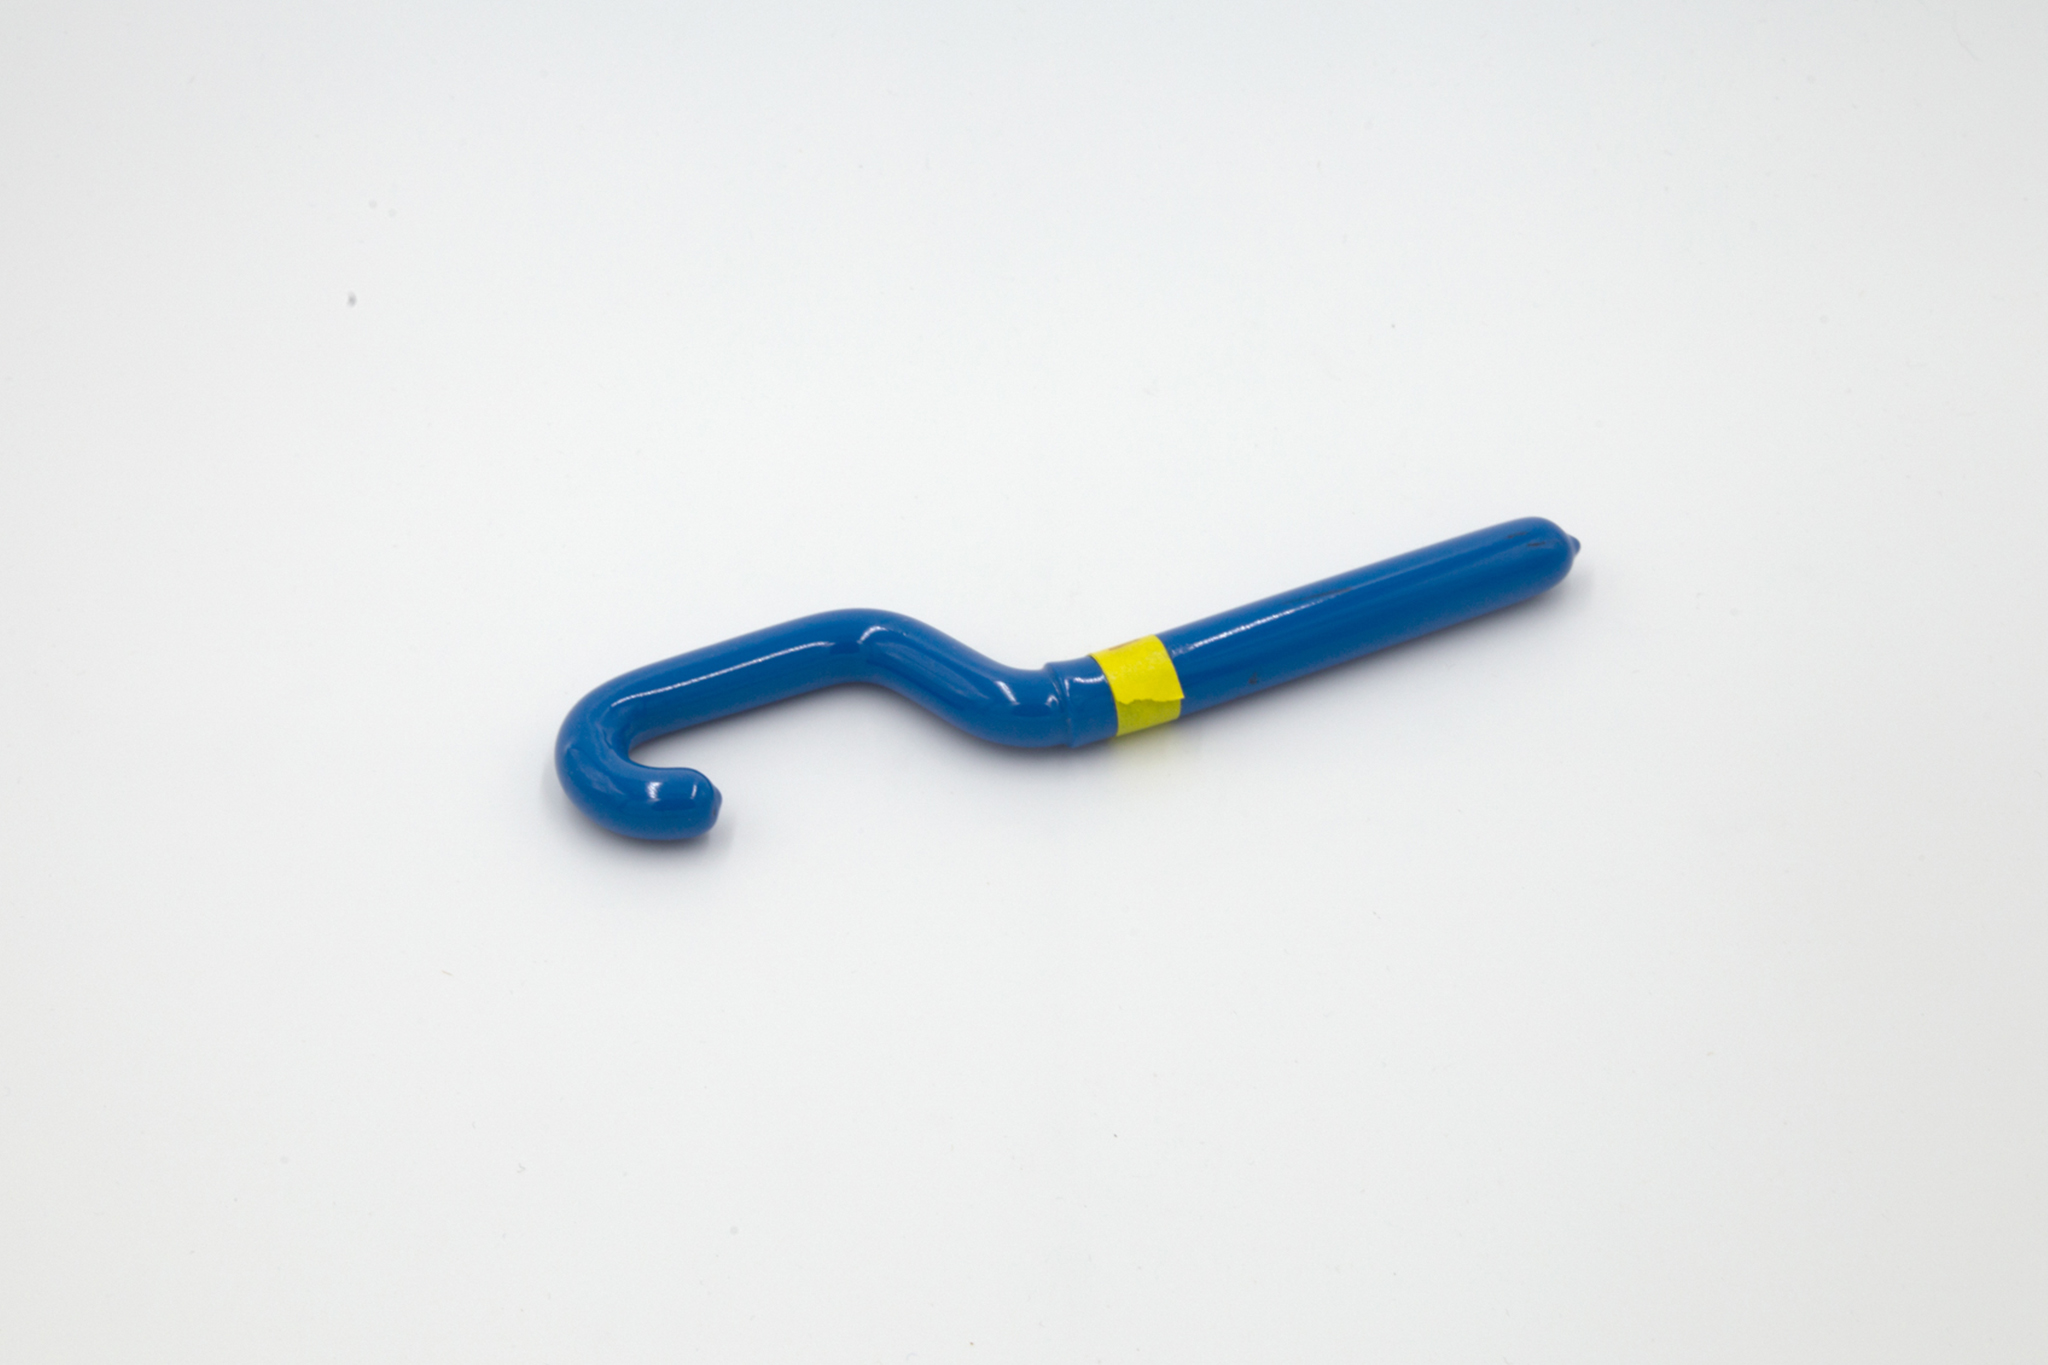 Blue cap wrench on white background